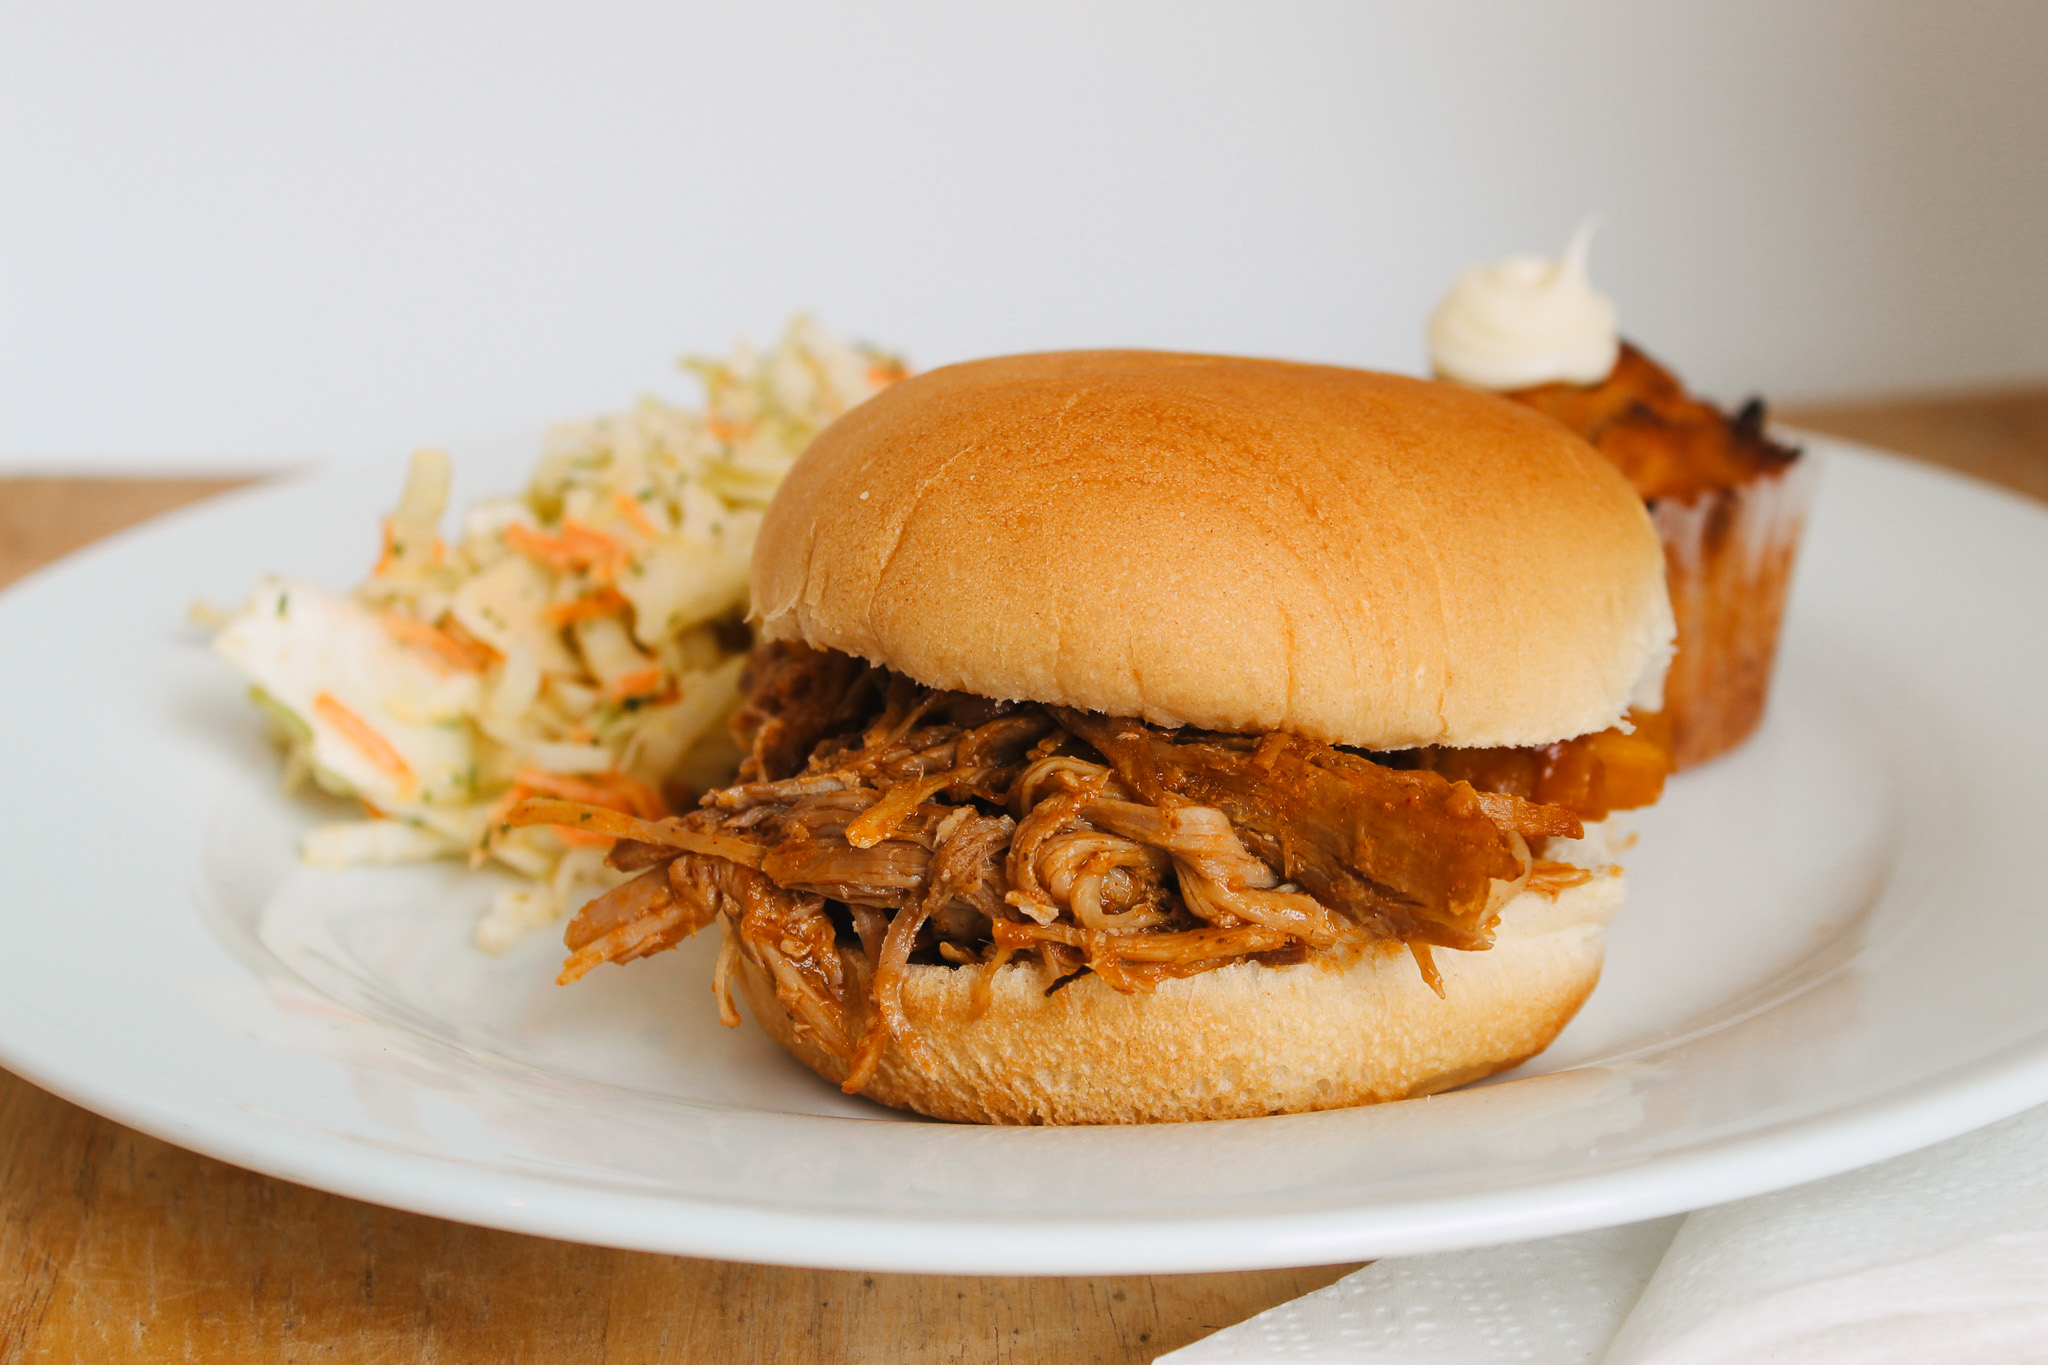 Community lunch - pulled pork with coleslaw, and a muffin